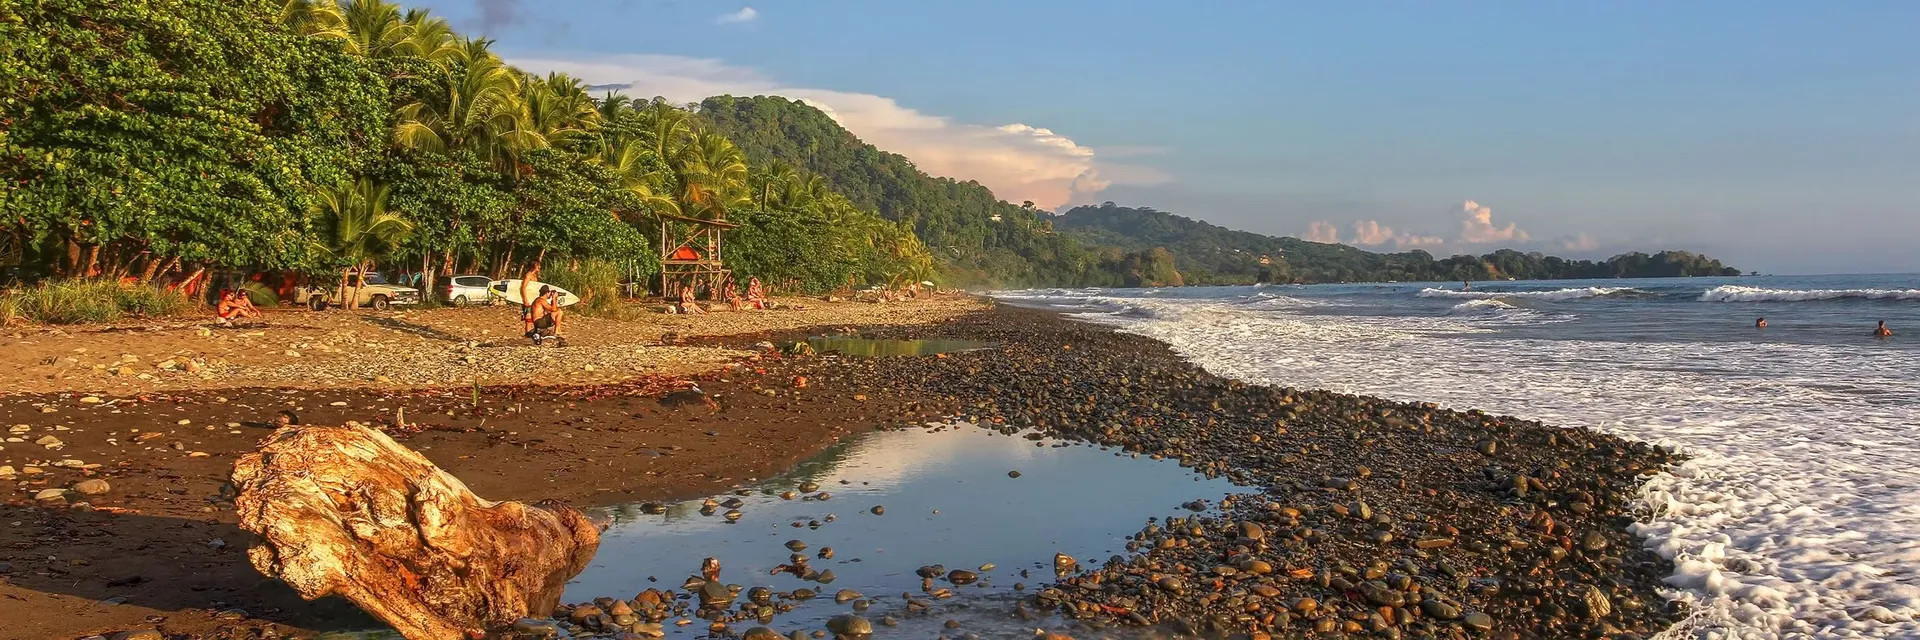 Dominical | Puntarenas Province Region, Costa Rica - Rated 5.3